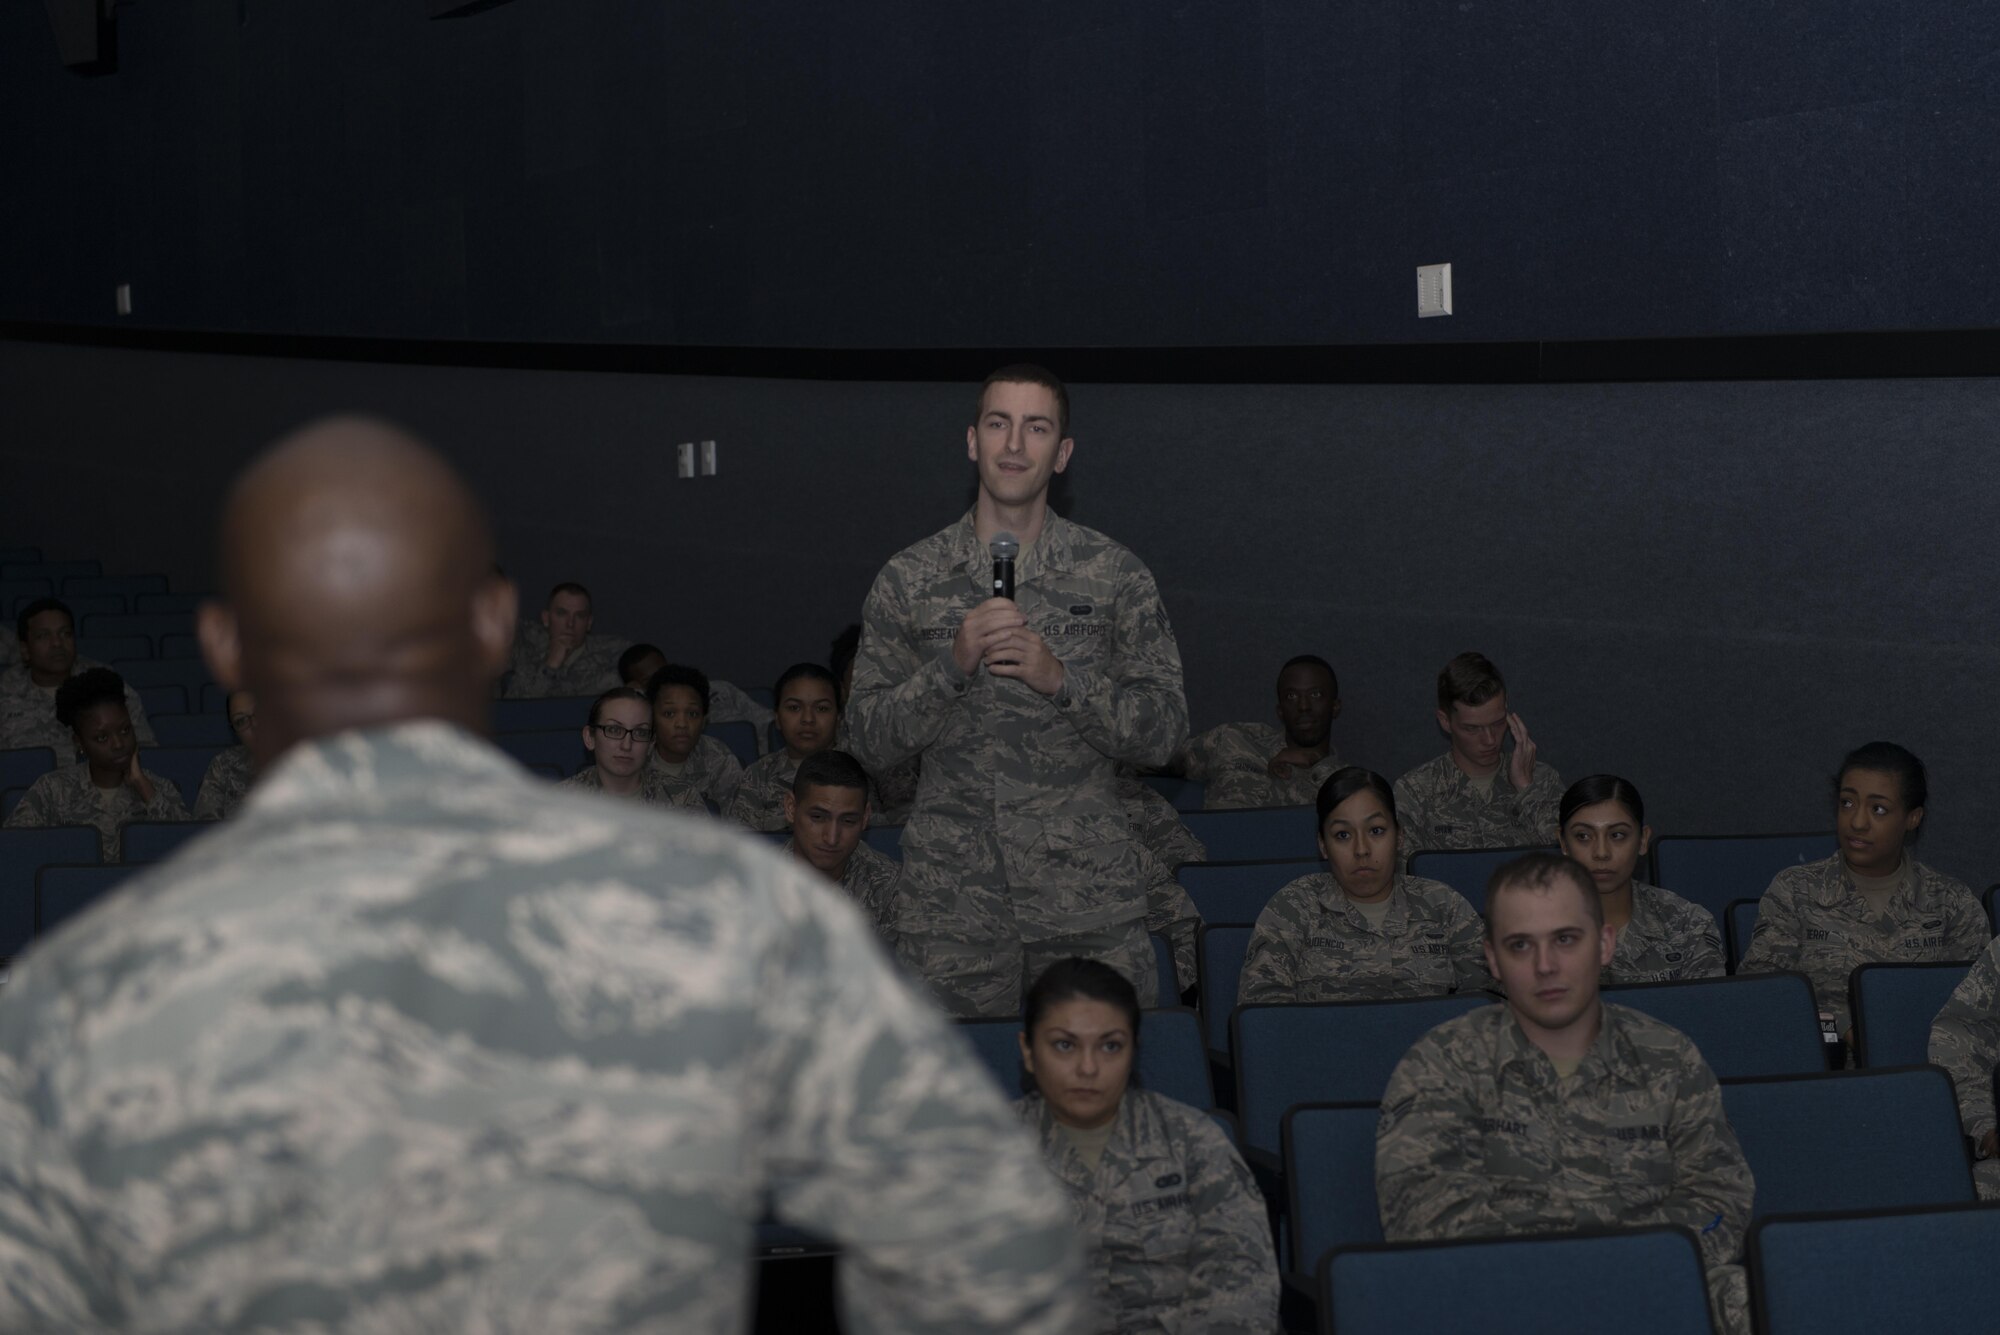 Senior Airman Albert Dusseault, 81st Communications Squadron base content manager, asks Chief Master Sgt. Vegas Clark, 81st Training Wing command chief, a question during an enlisted call at the Welch Theater Oct 12, 2016, on Keesler Air Force Base, Miss. During the enlisted call, Clark discussed his expectations, the commander’s vision, the future of Airmen’s careers and various topics around the base. (U.S. Air Force photo by Andre’ Askew/Released)